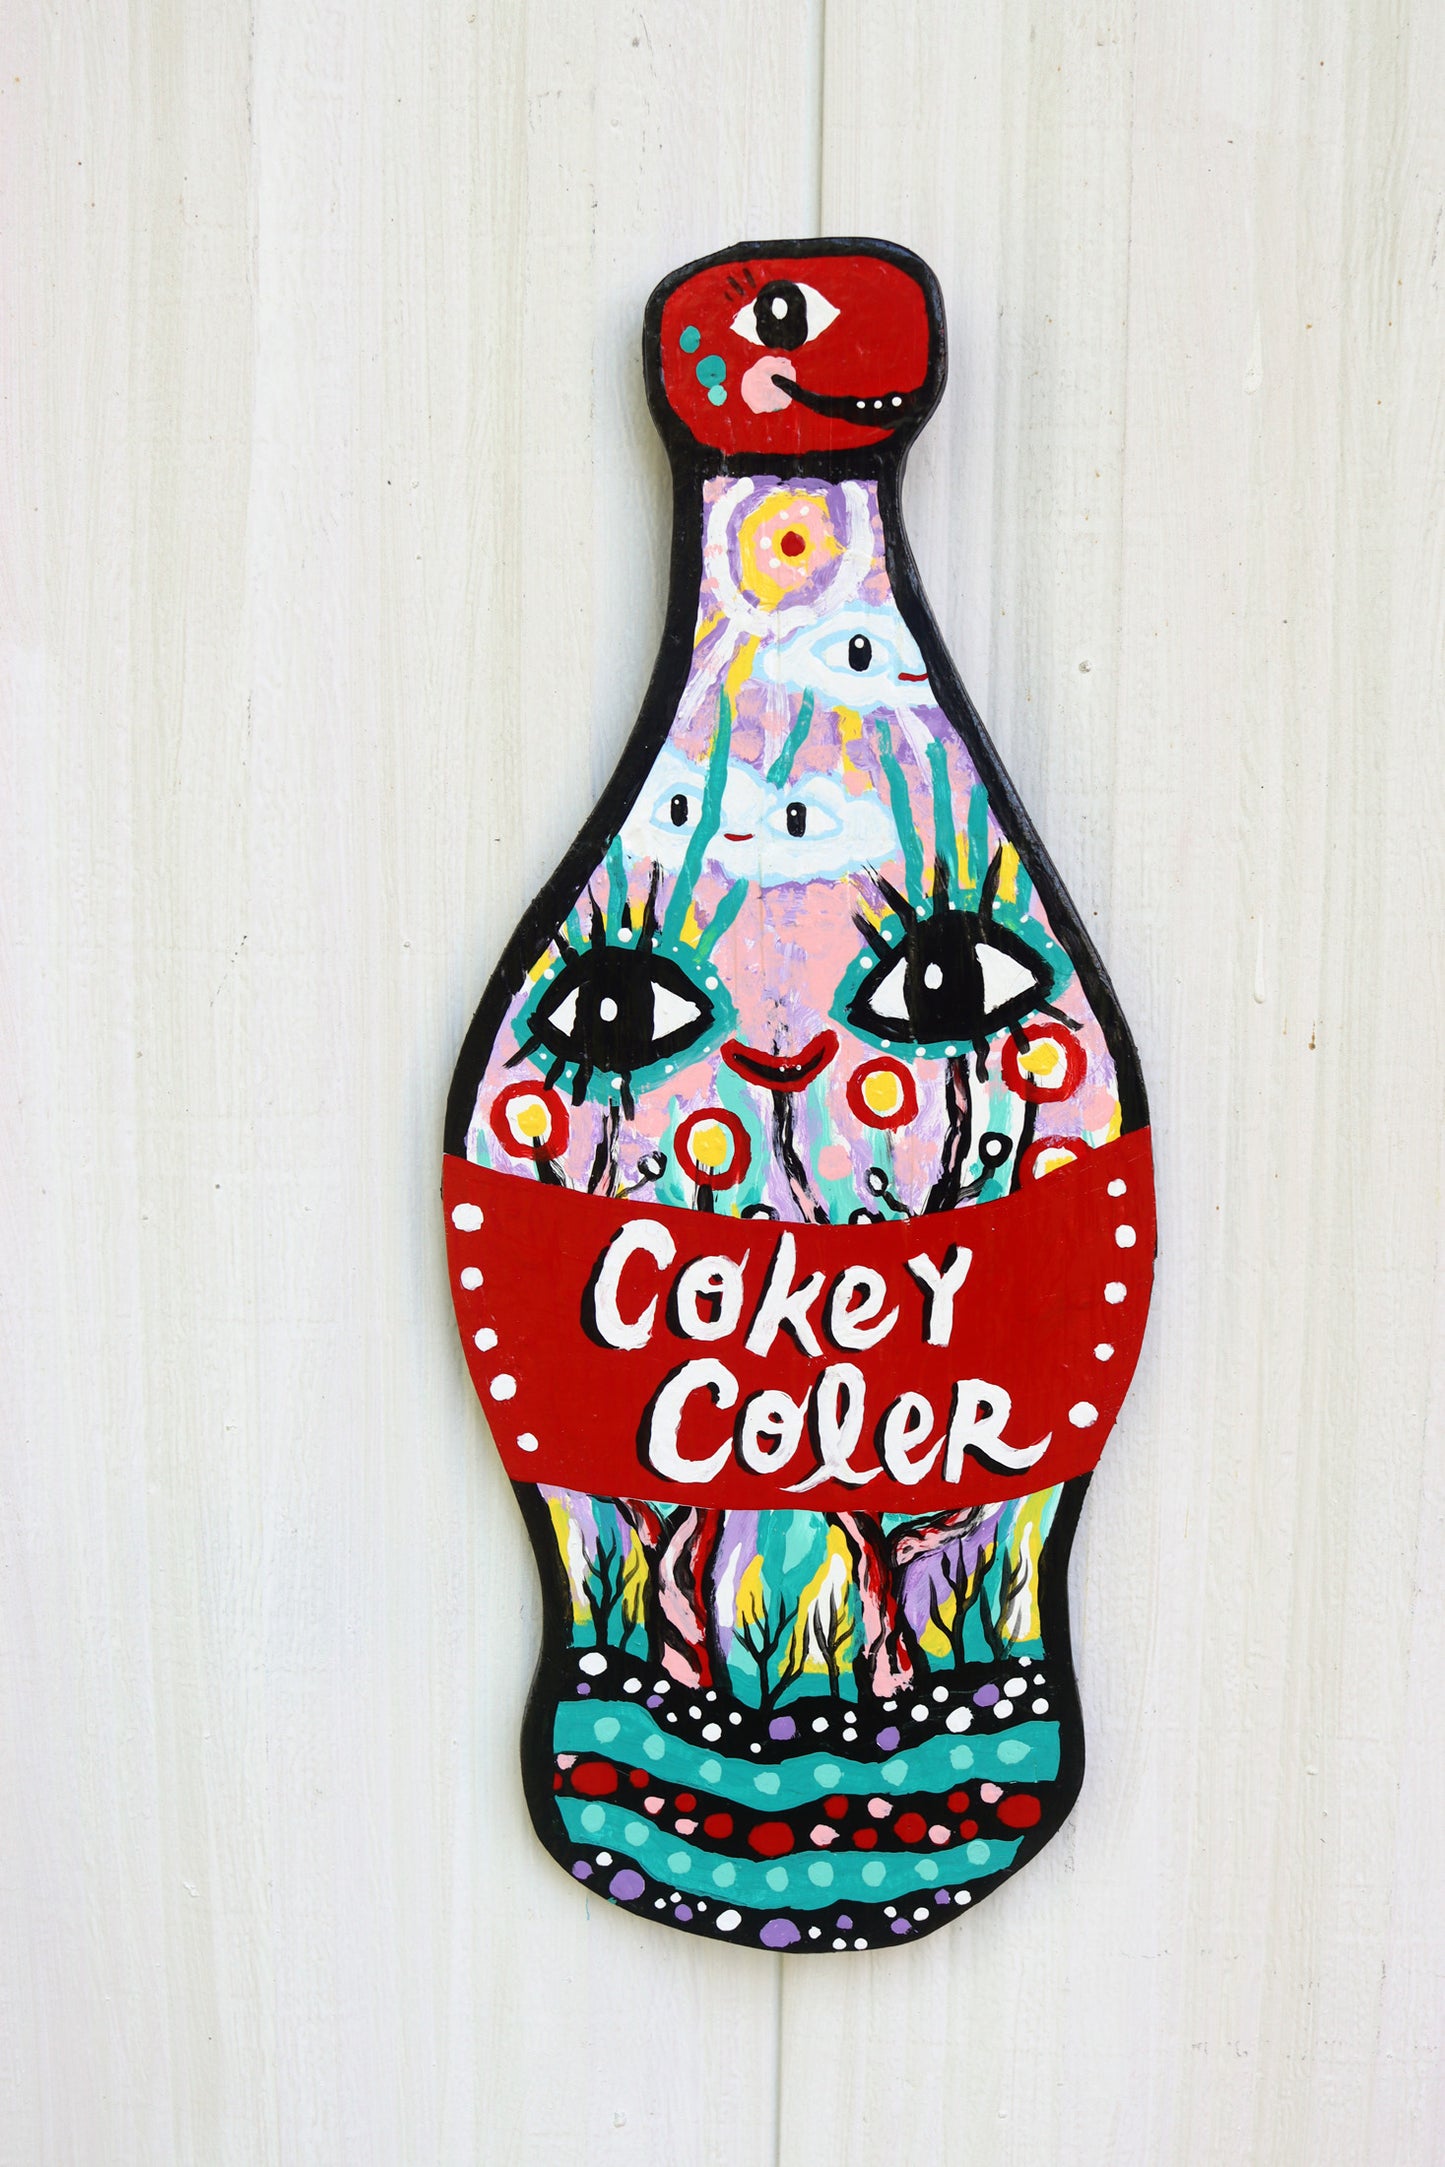 Cokey Coler Bottle with Flowers